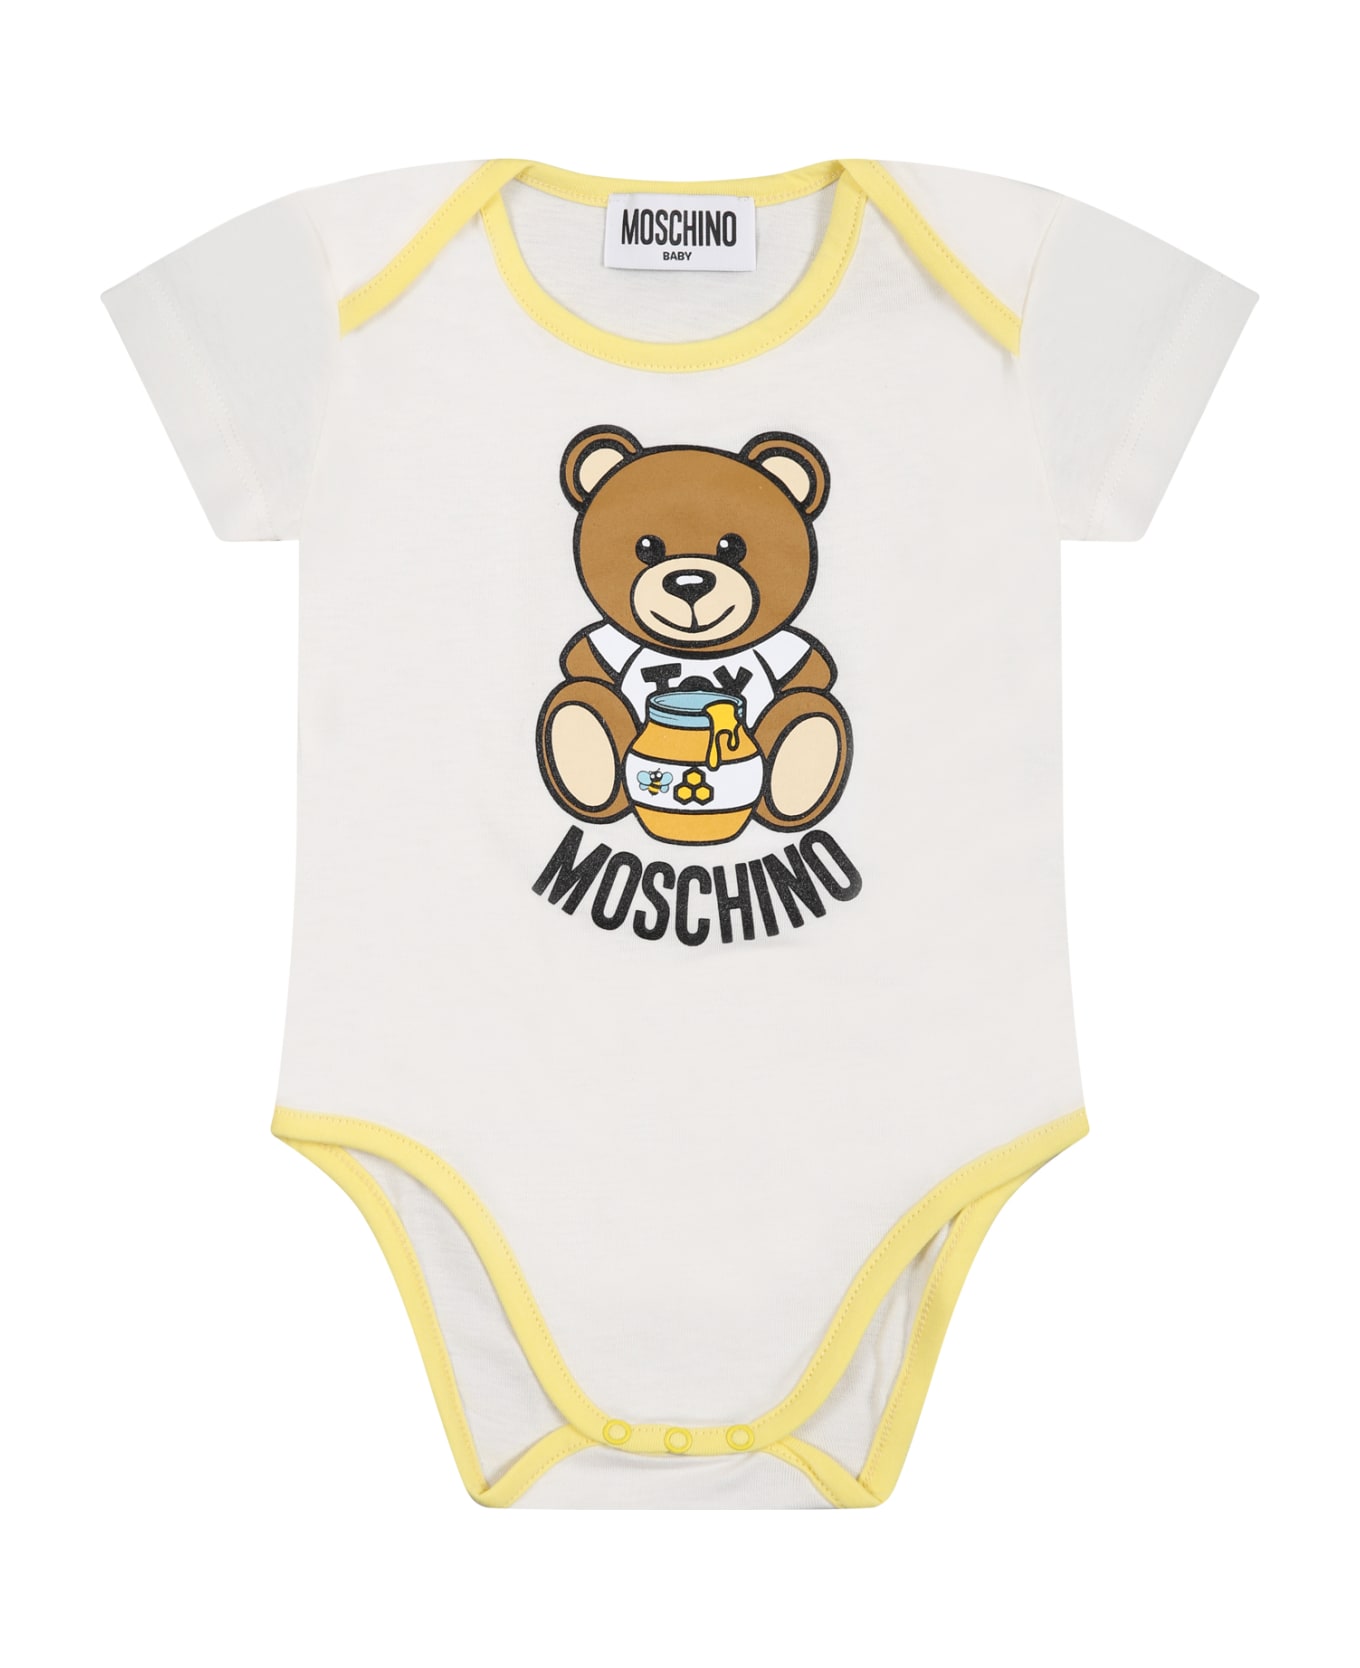 Moschino Multicolor Set For Babies With Teddy Bear And Print - Multicolor